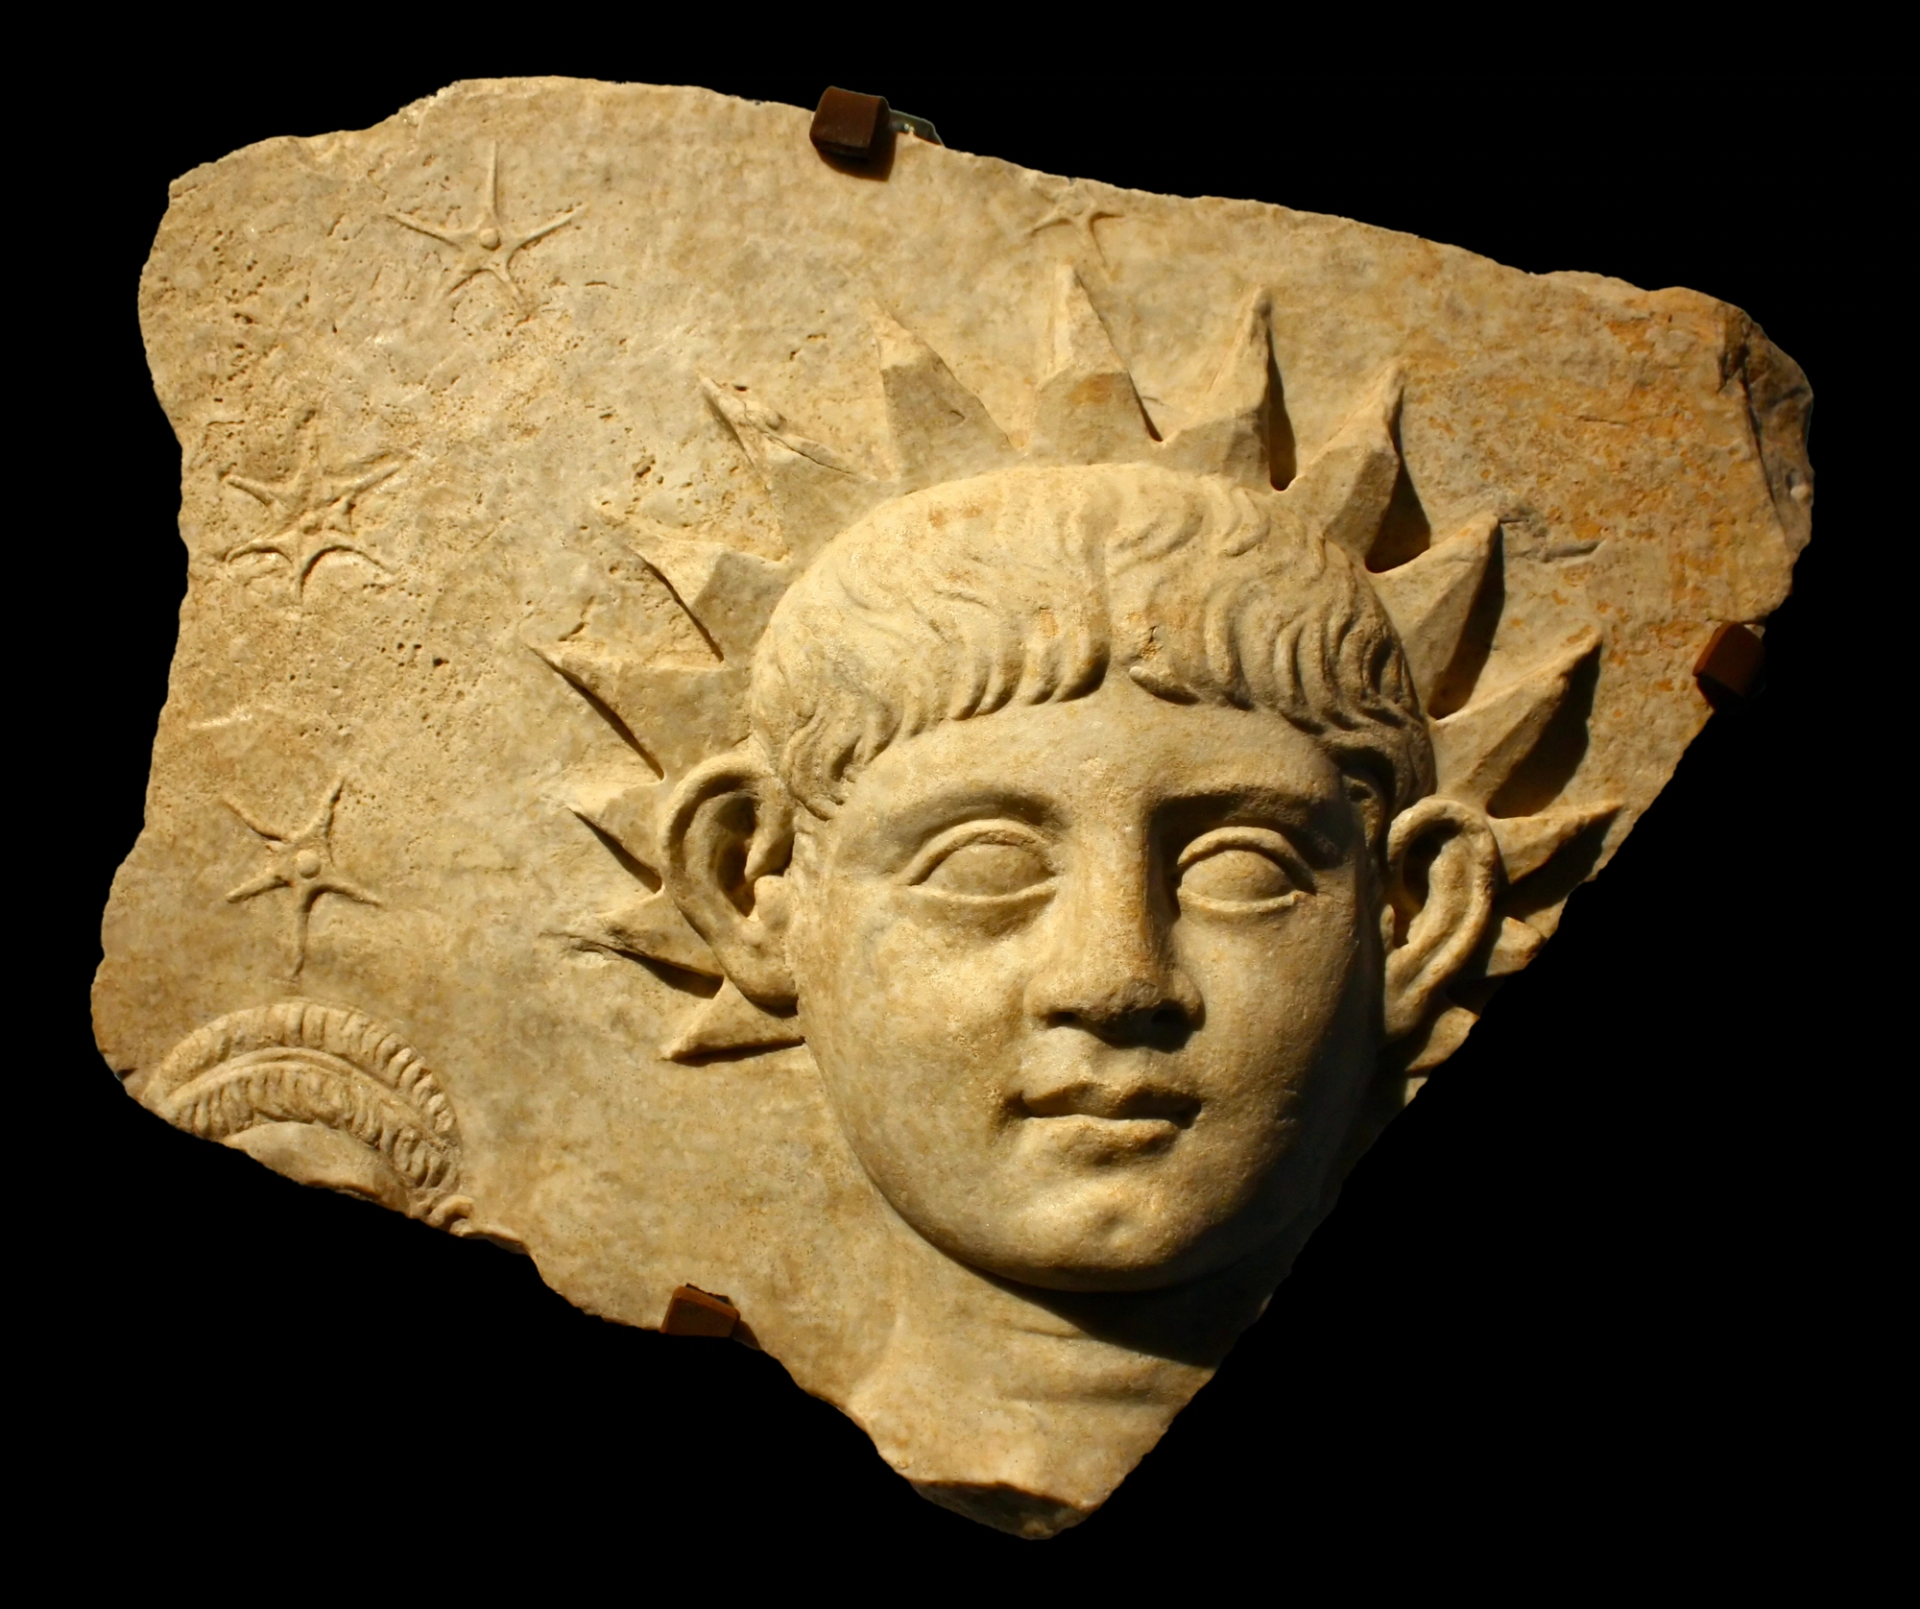 Ancient Roman sculpture of a young boy with radiating sunlight from his hair.